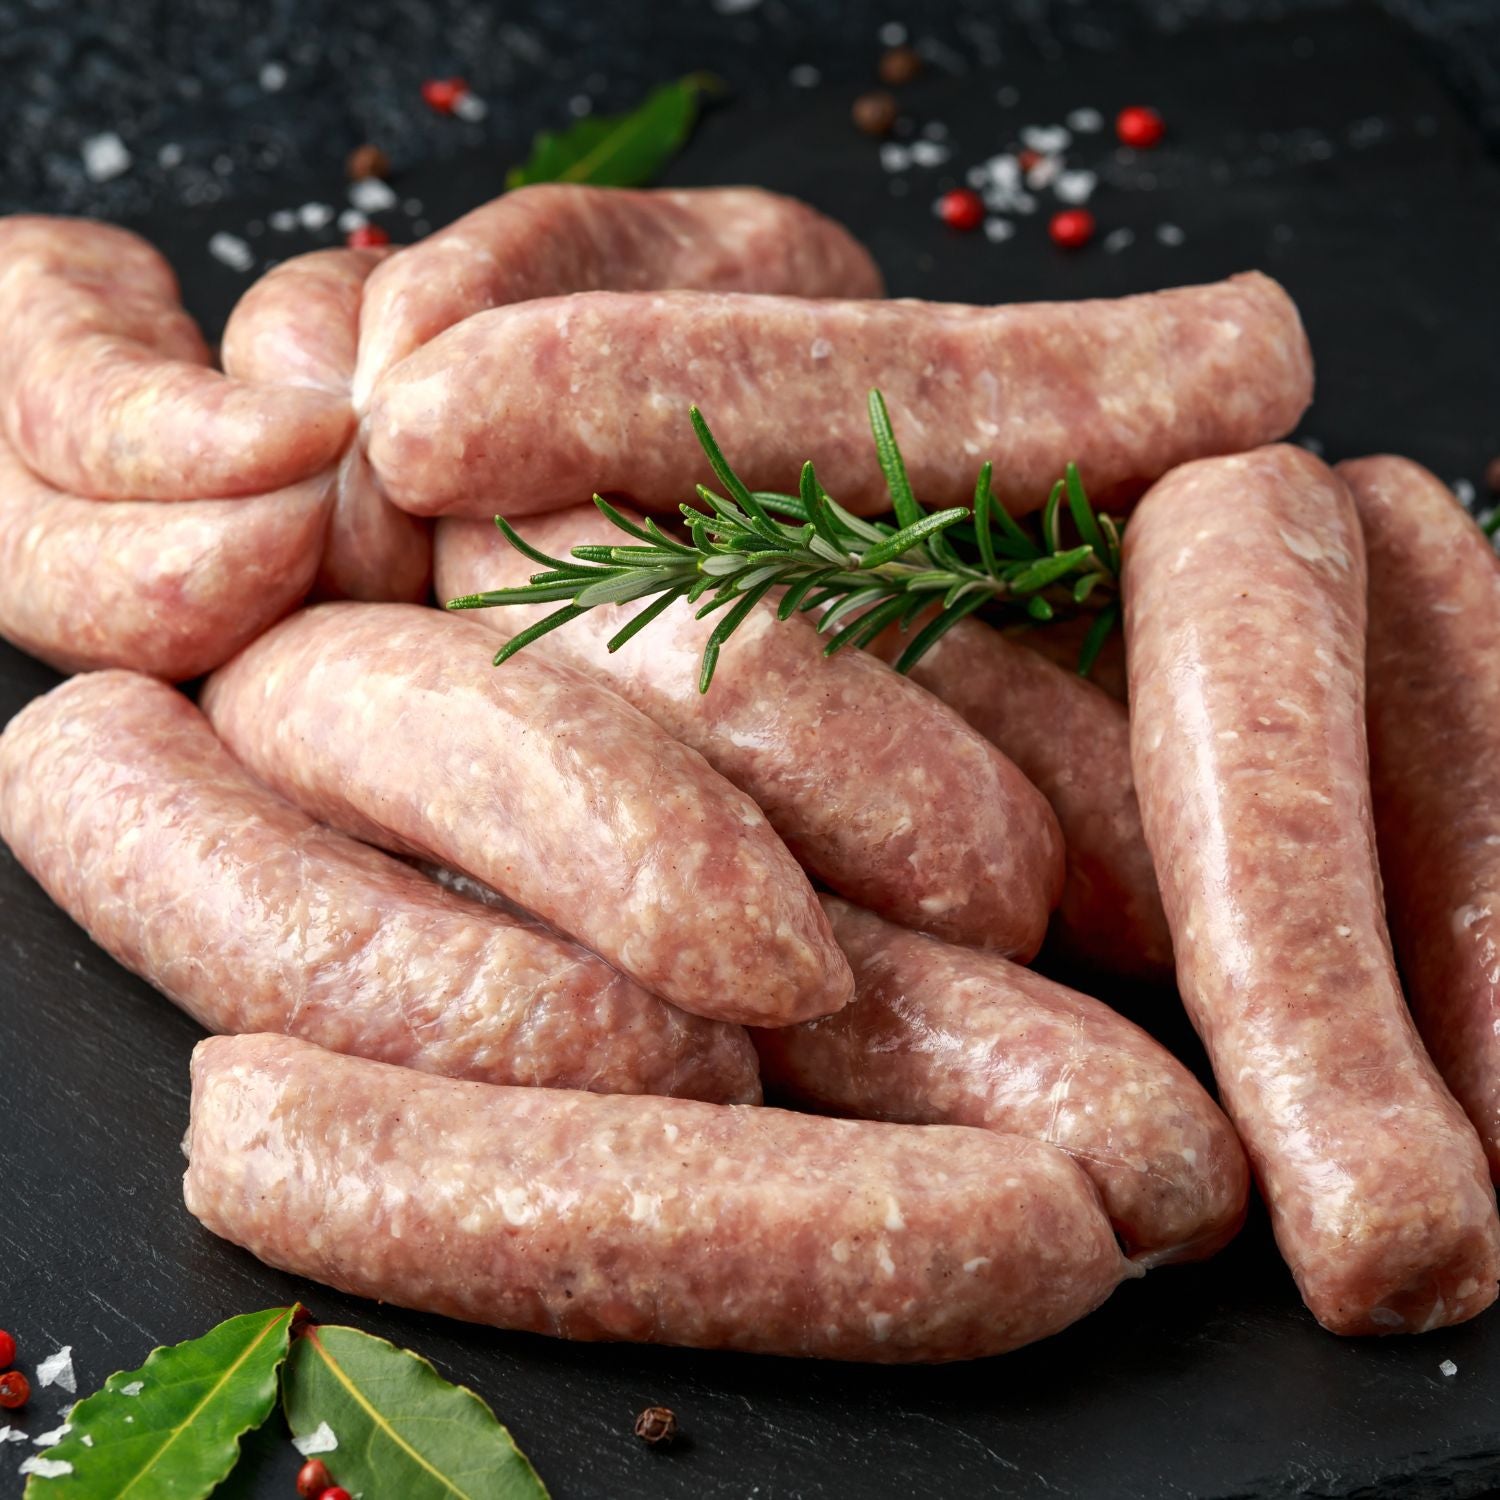 English Traditional Premium Pork Sausages - Unforgettable Flavor, Quality Ingredients and Versatile Cooking